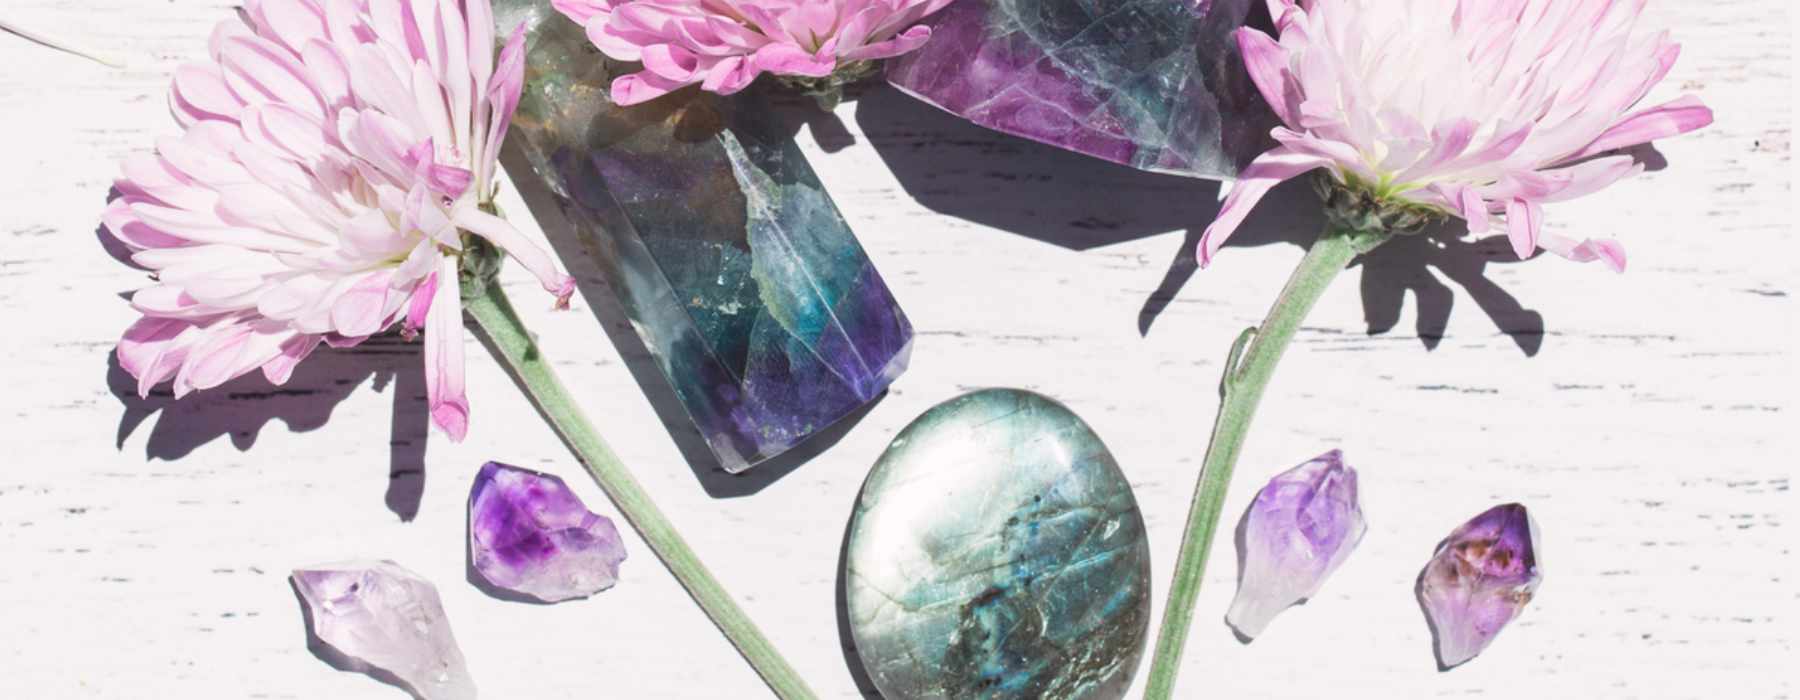 Your source for modern and unique crystals